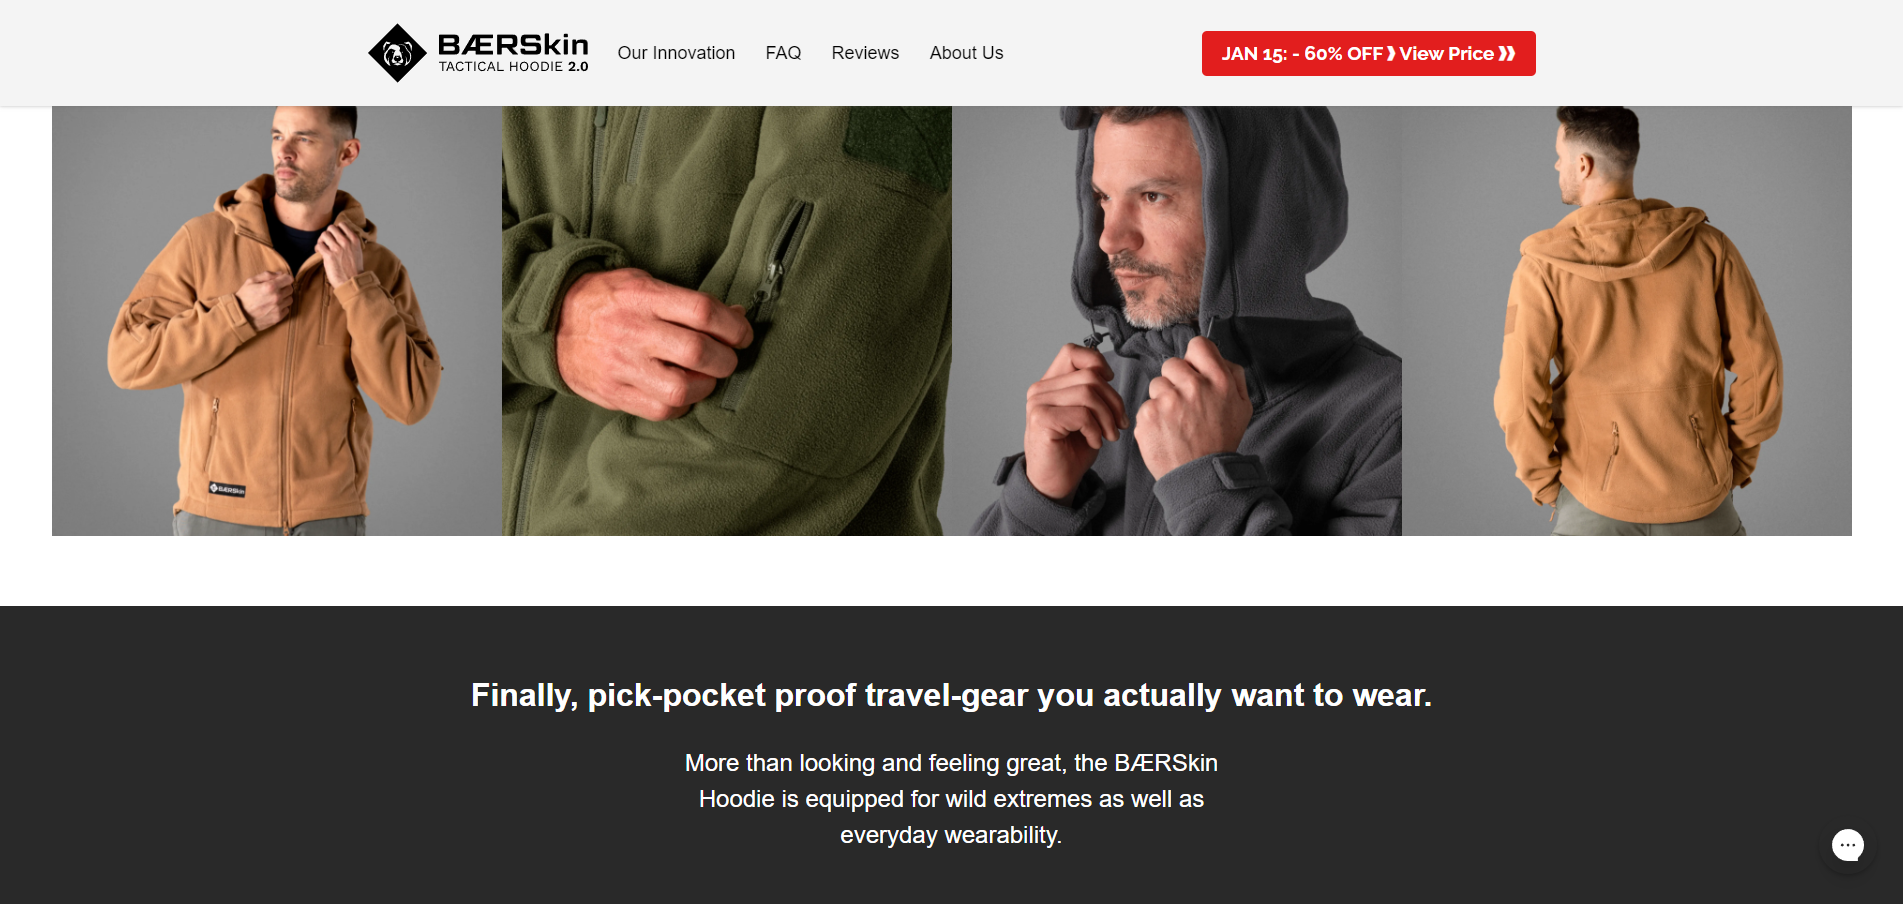 Baerskin hoodie review: is it legit or Scam? get the complete facts here